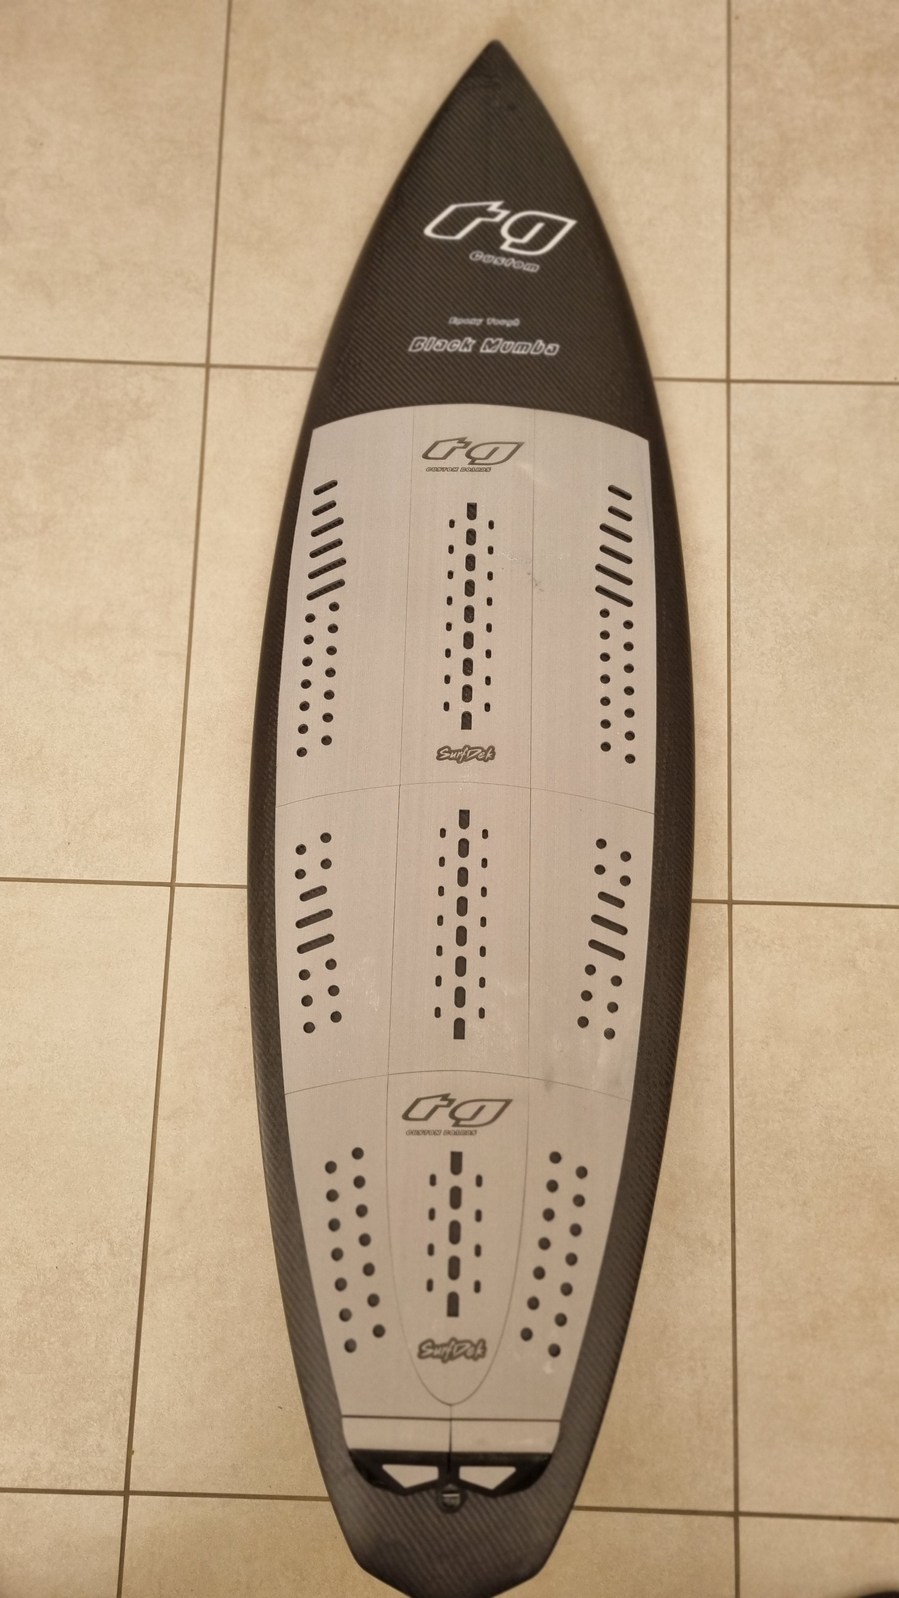 The 'Black Mumba' a full carbon vac bagged board with full deck grip and leash plug. Tri fin set up. Double concave hull, quick to plane. Hard rails towards the tail. The concaved deck. Epoxy tough. Ripper!